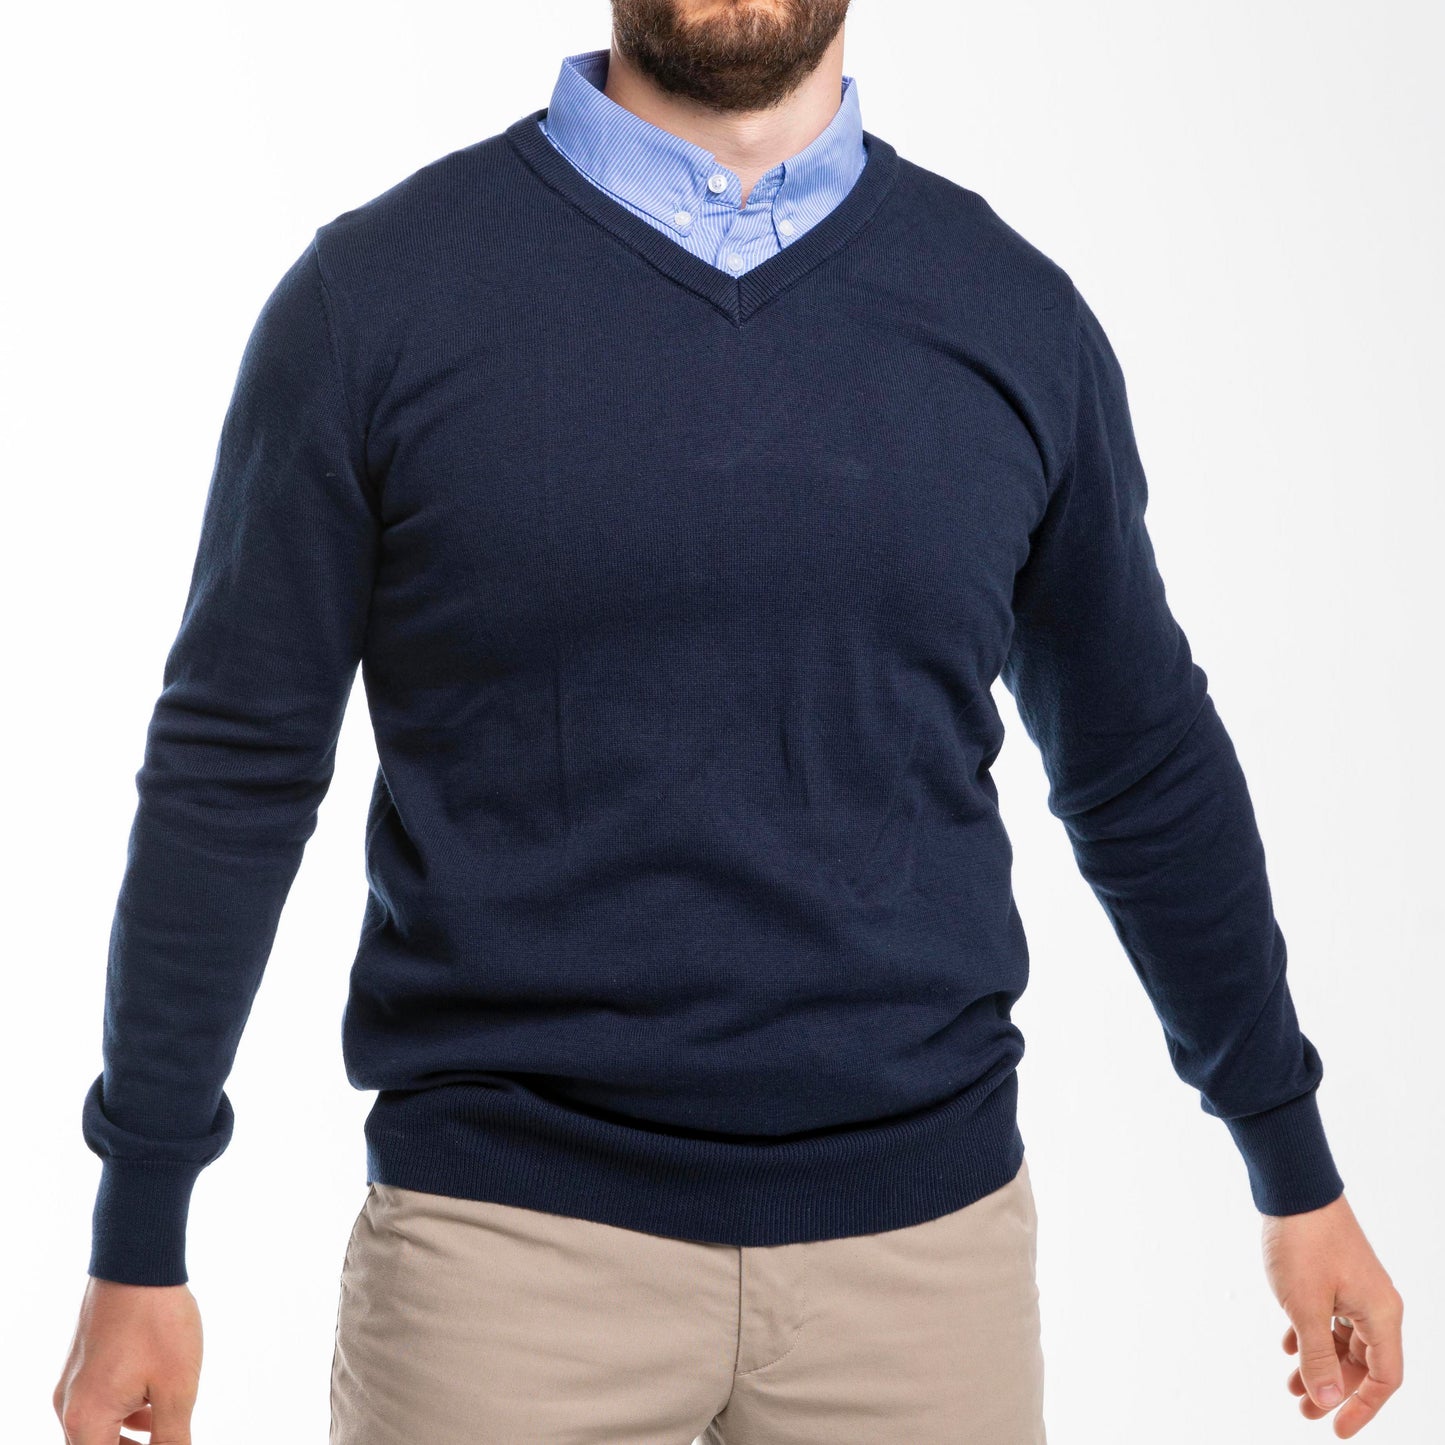 Sapphire Sweater with Blue Striped Collar – Flying Point Apparel